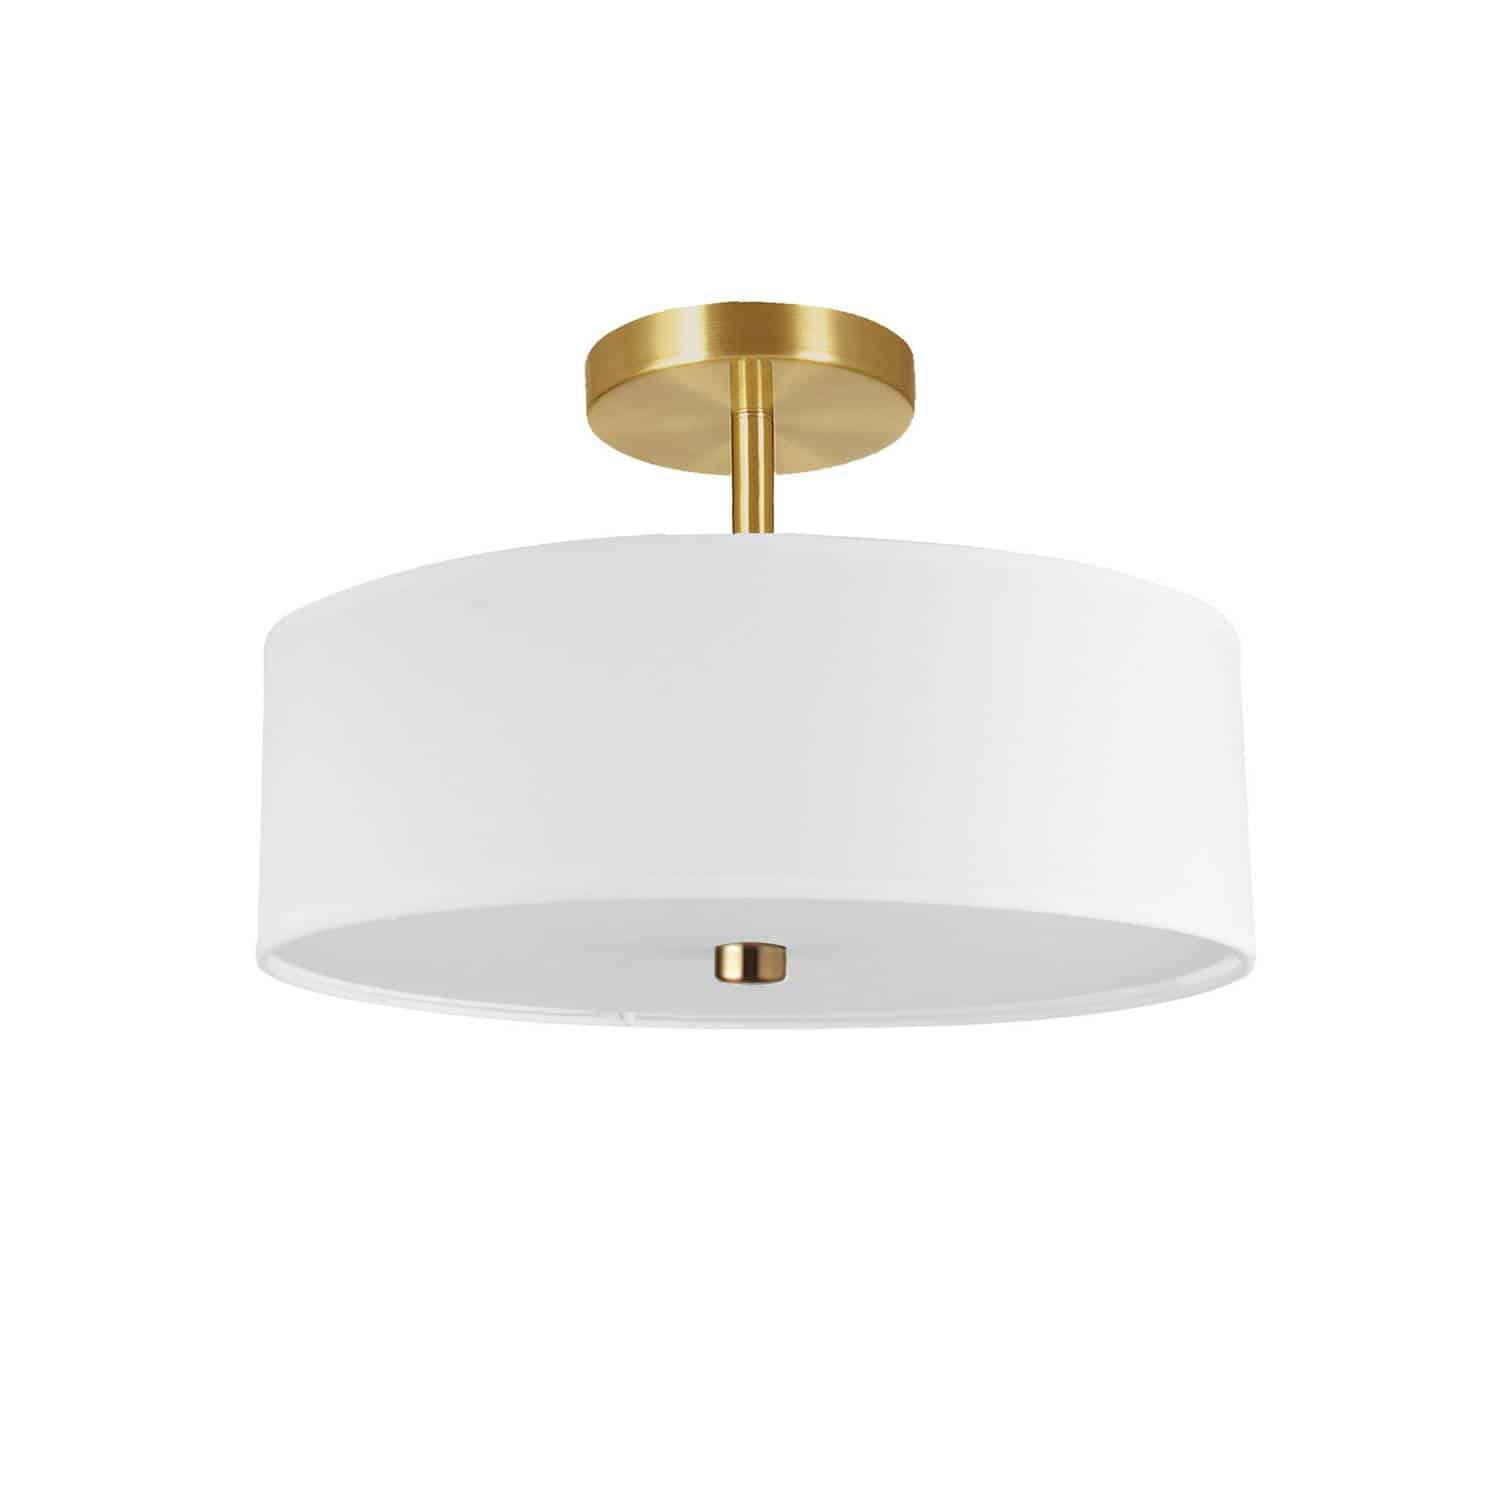 Dainolite Everly - 571-143SF-AGB-WH - 3 Light Semi-Flush Mount Aged Brass with White Shade - White